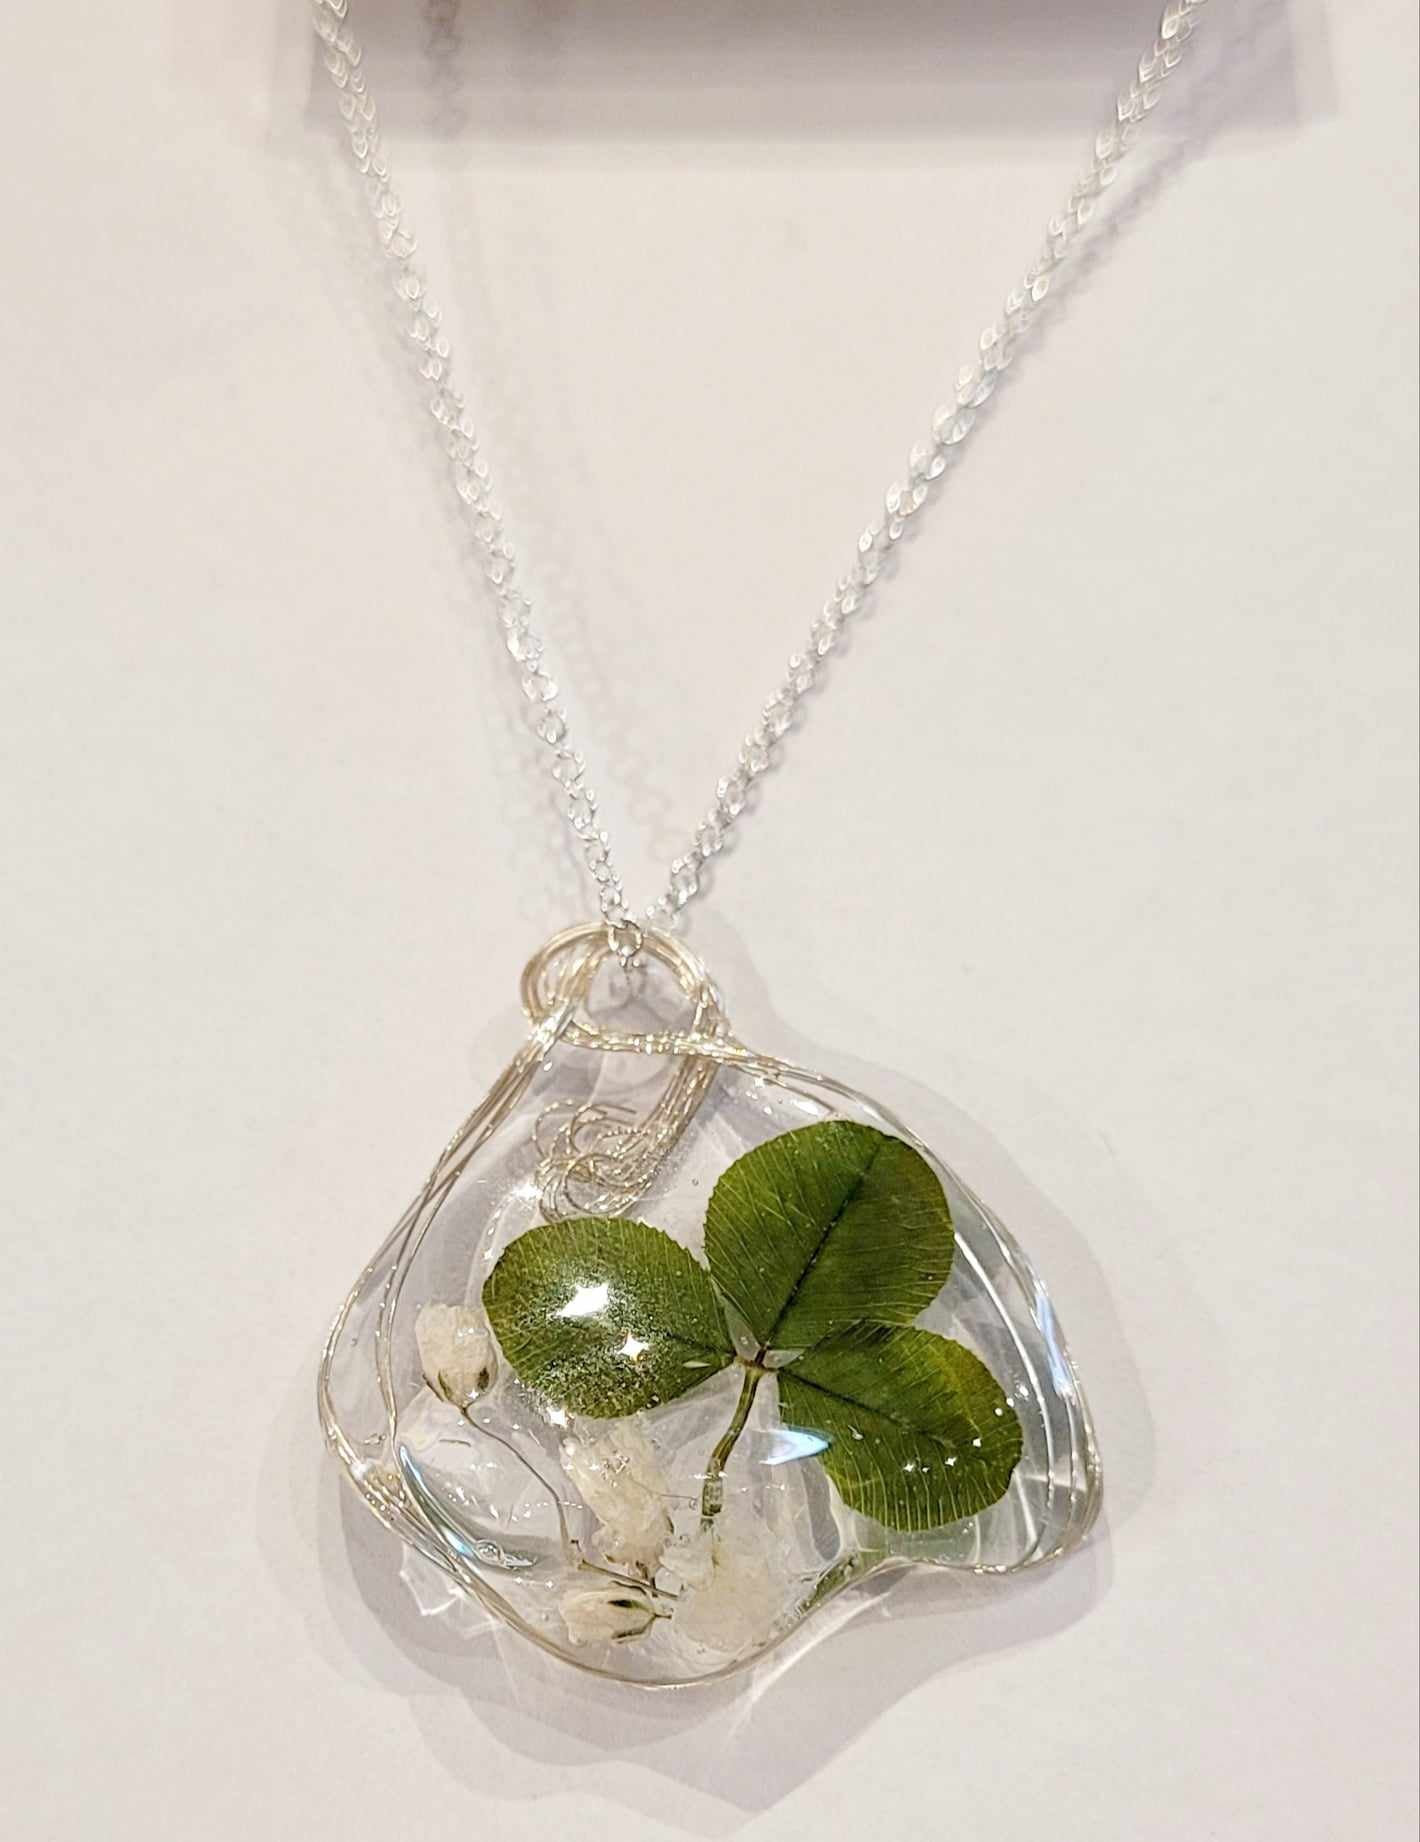 Shamrock Pendent & Chain by Alla